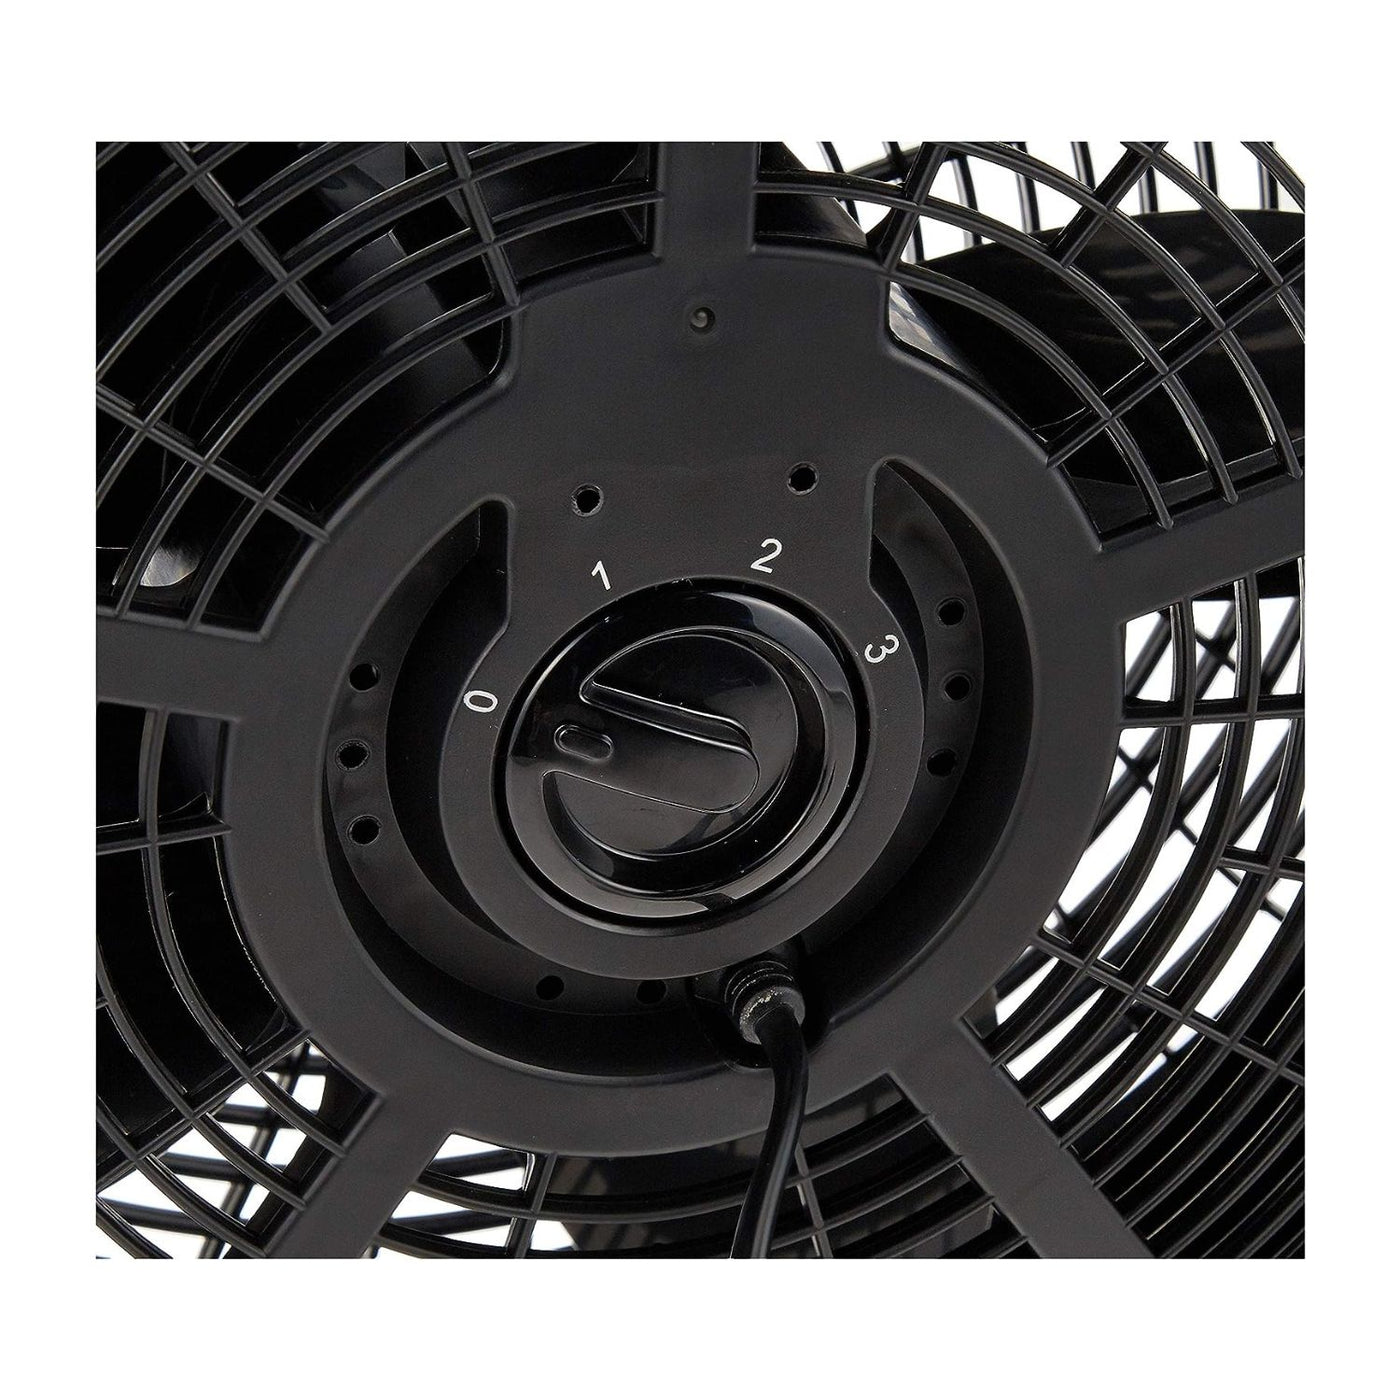 Box fan with 3 Speed control, sturdy base and Adjustable Swivel - 16 inch Compact design FB1620-B5 Black